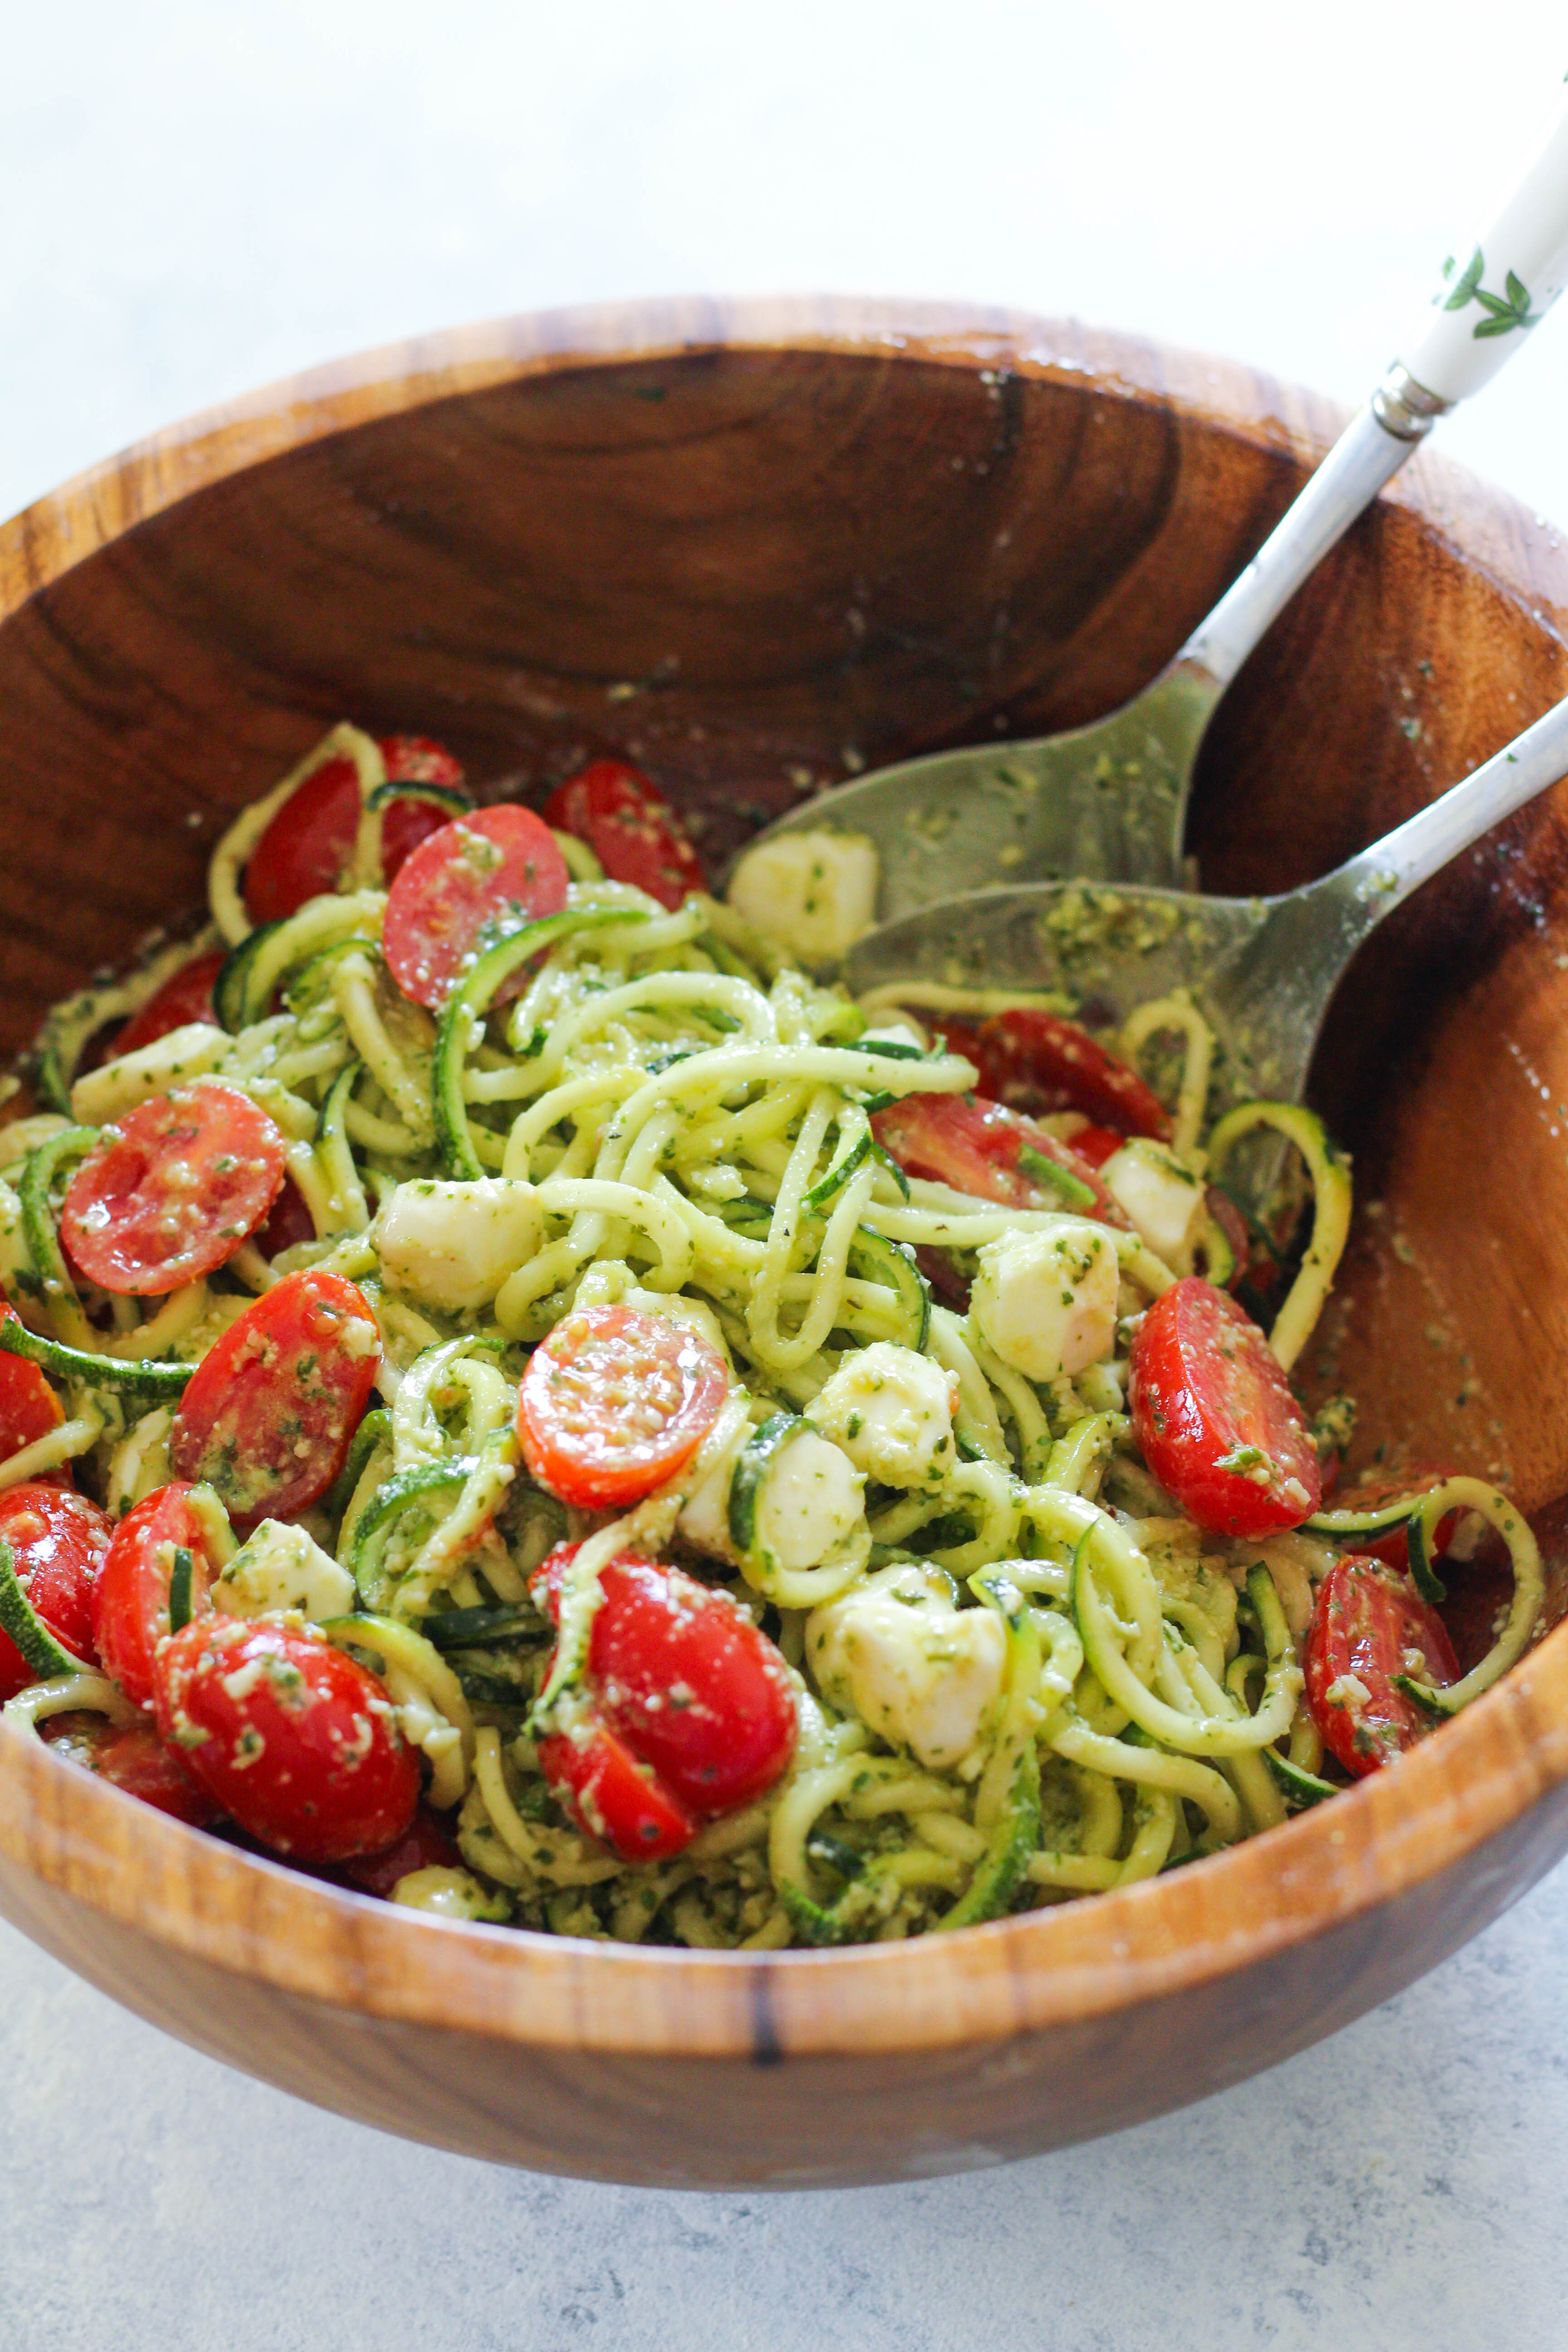  These Pesto Zucchini Noodles are a light and summery dish that doesn’t require a stove top or oven! Simply whip together a fresh basil pesto and toss zucchini noodles with cherry tomatoes and mozzarella pearls.